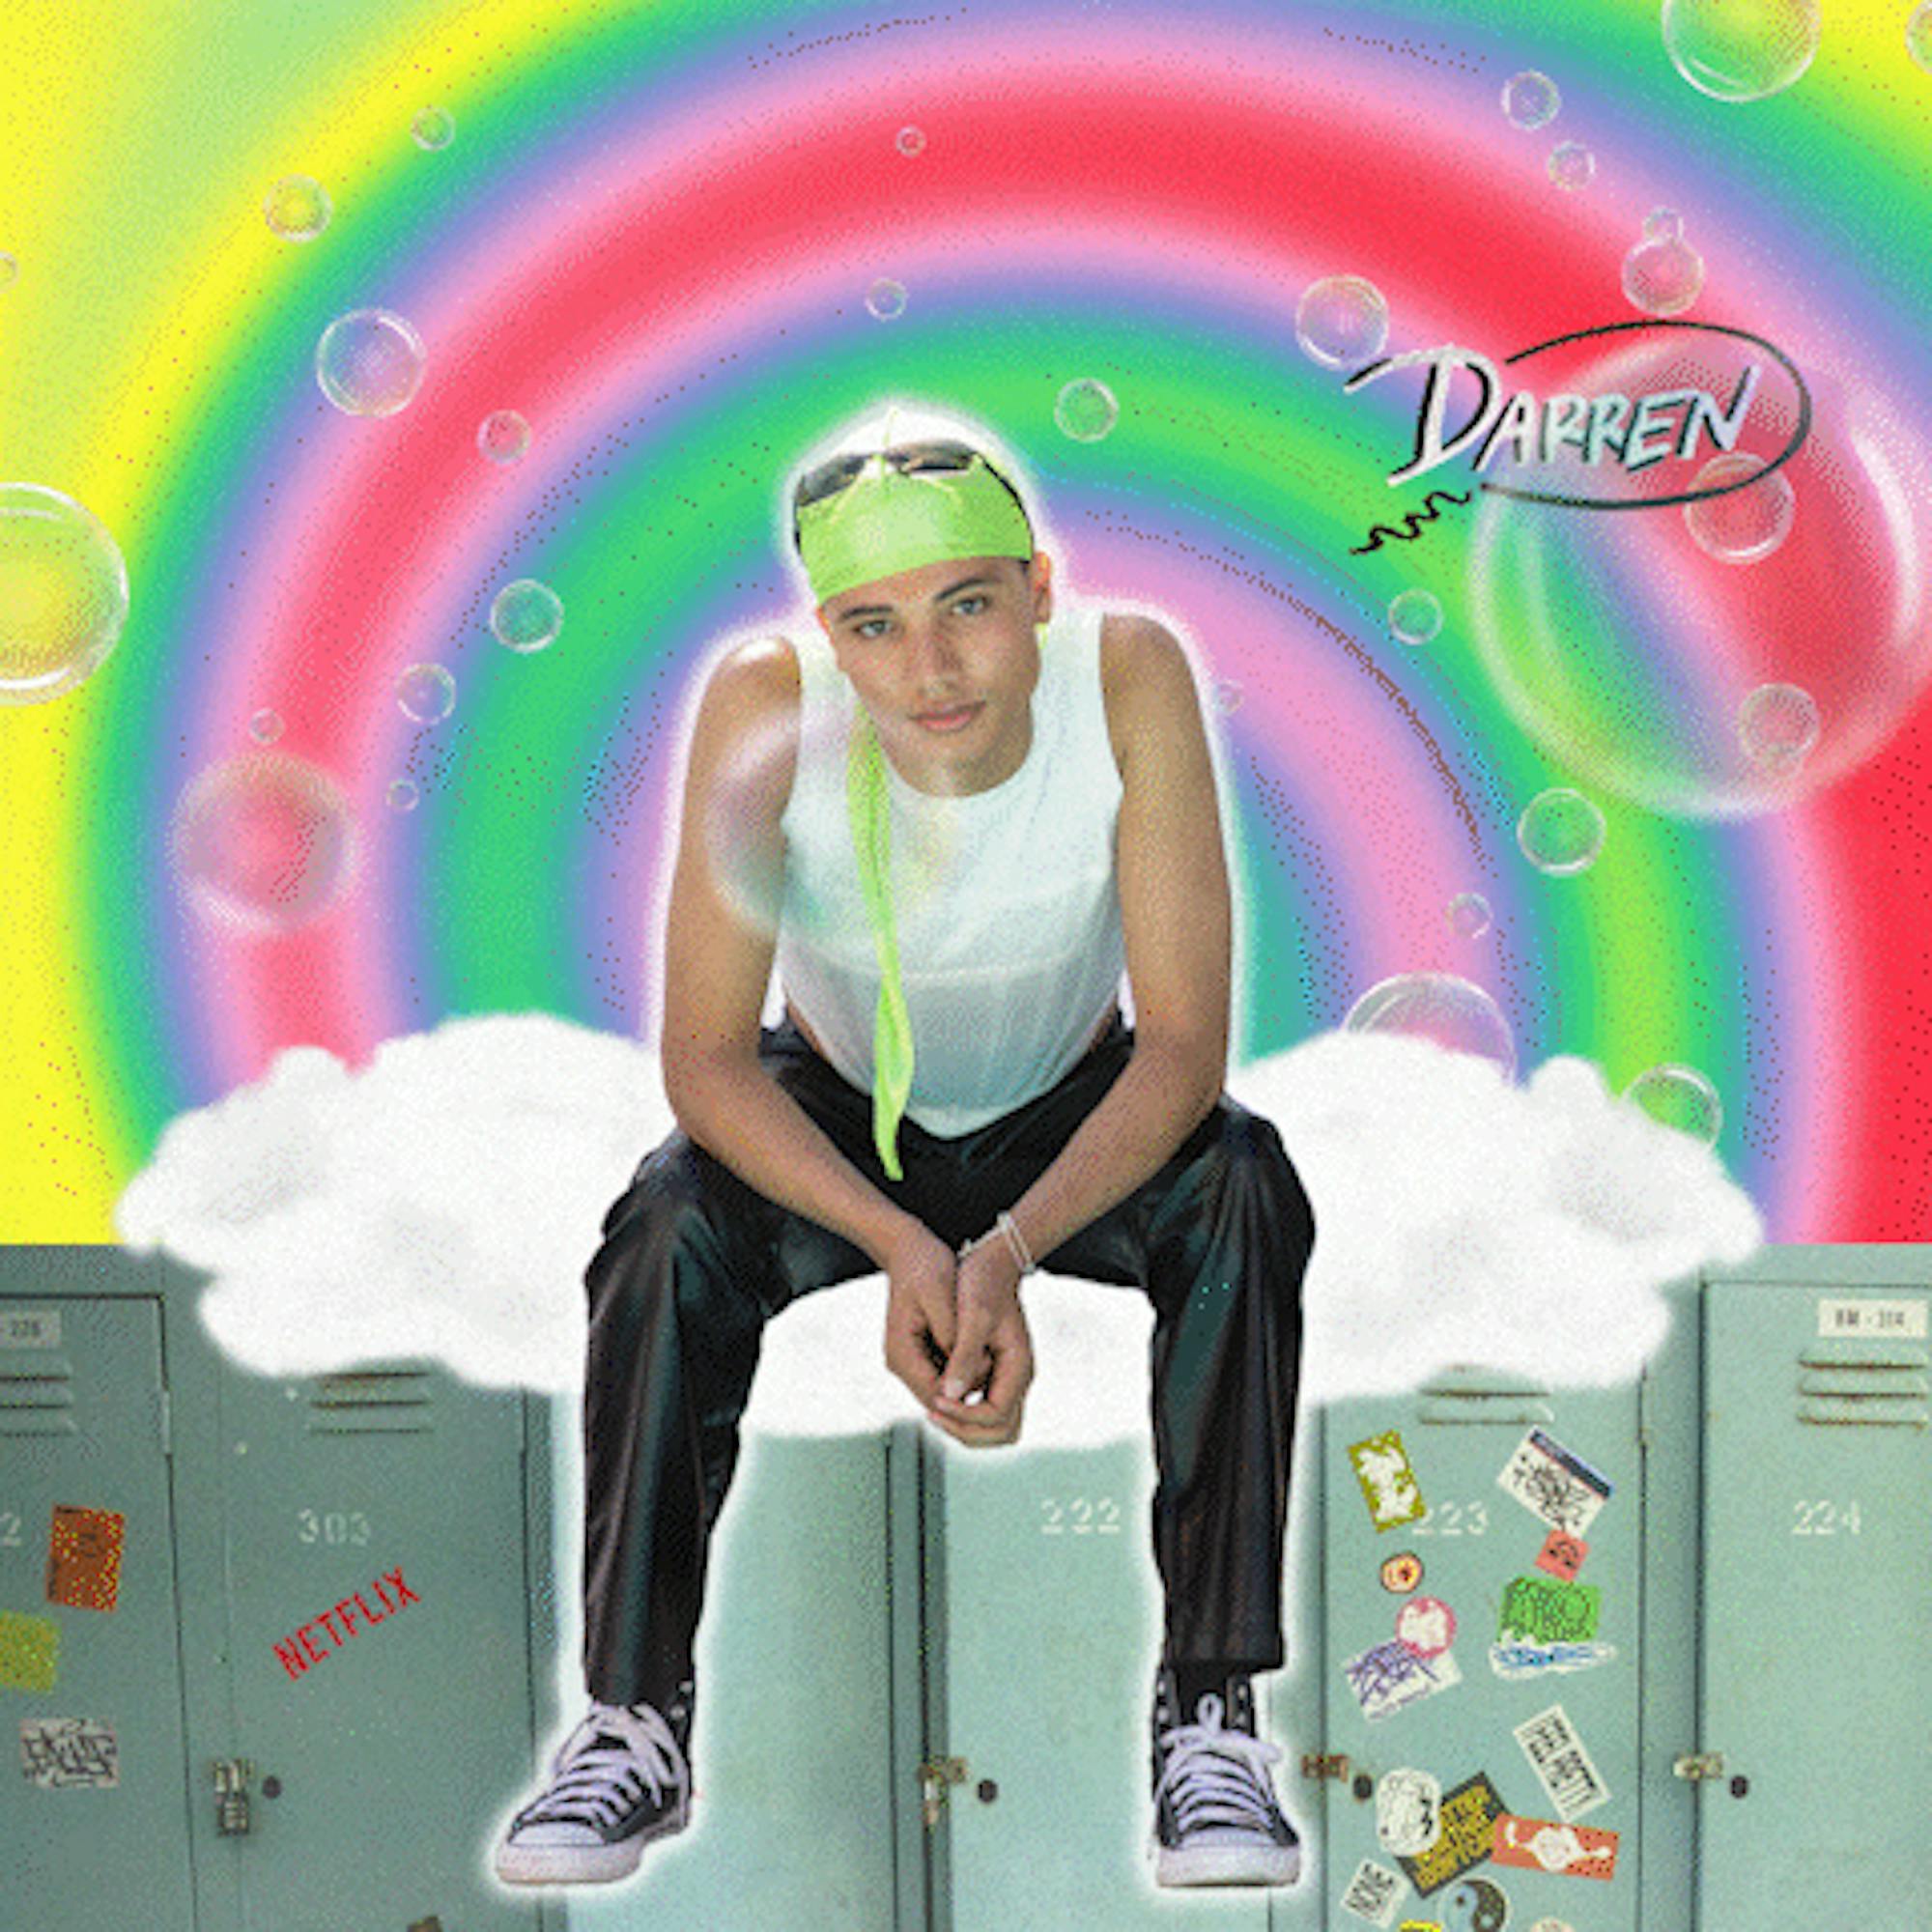 James Majoos plays Darren. Here they wear a green headscarf, white tank top, and black pants. Behind them is an animated rainbow with their name in a speech bubble to the right of their head.